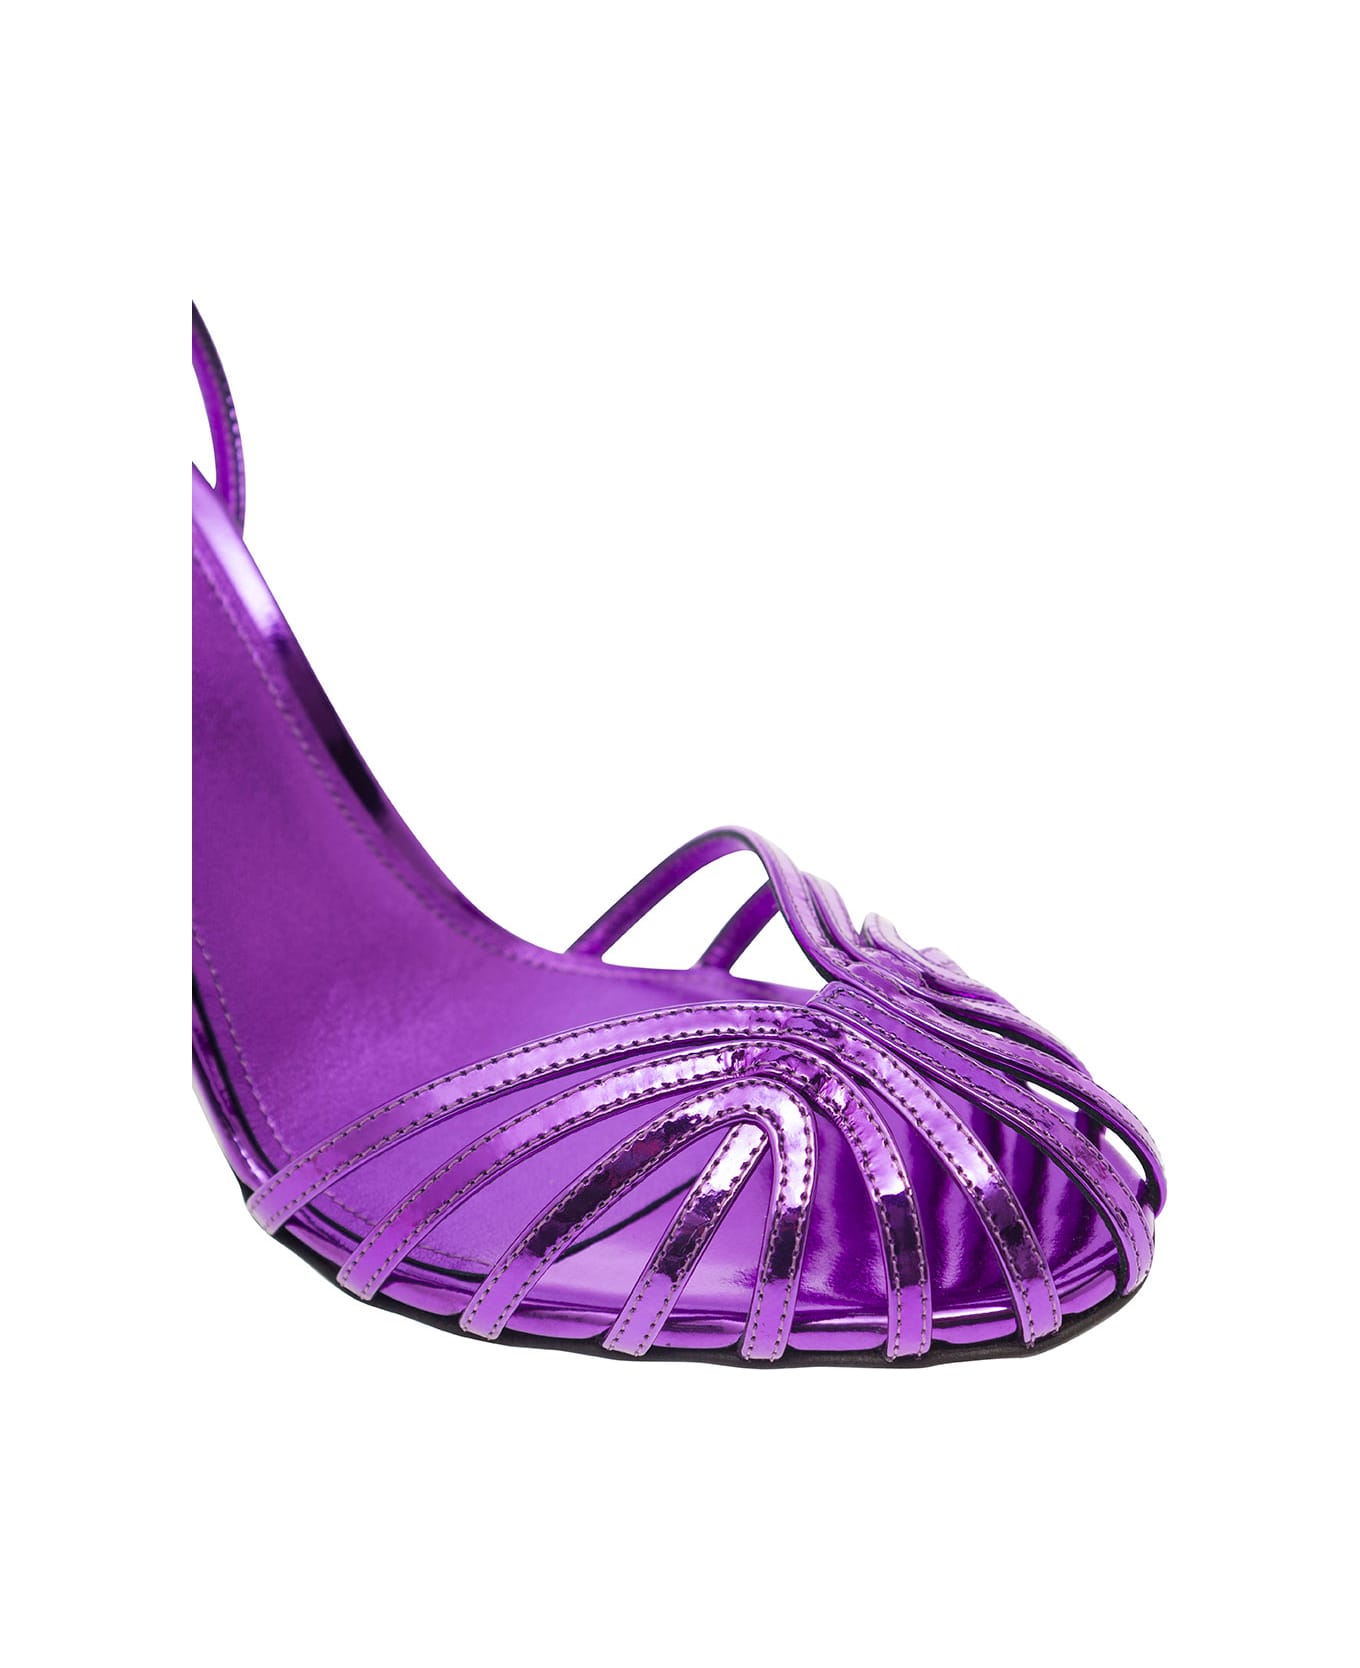 Alevì 'ally' Purple Sandals With Stiletto Heel In Metallic Leather Woman - Violet